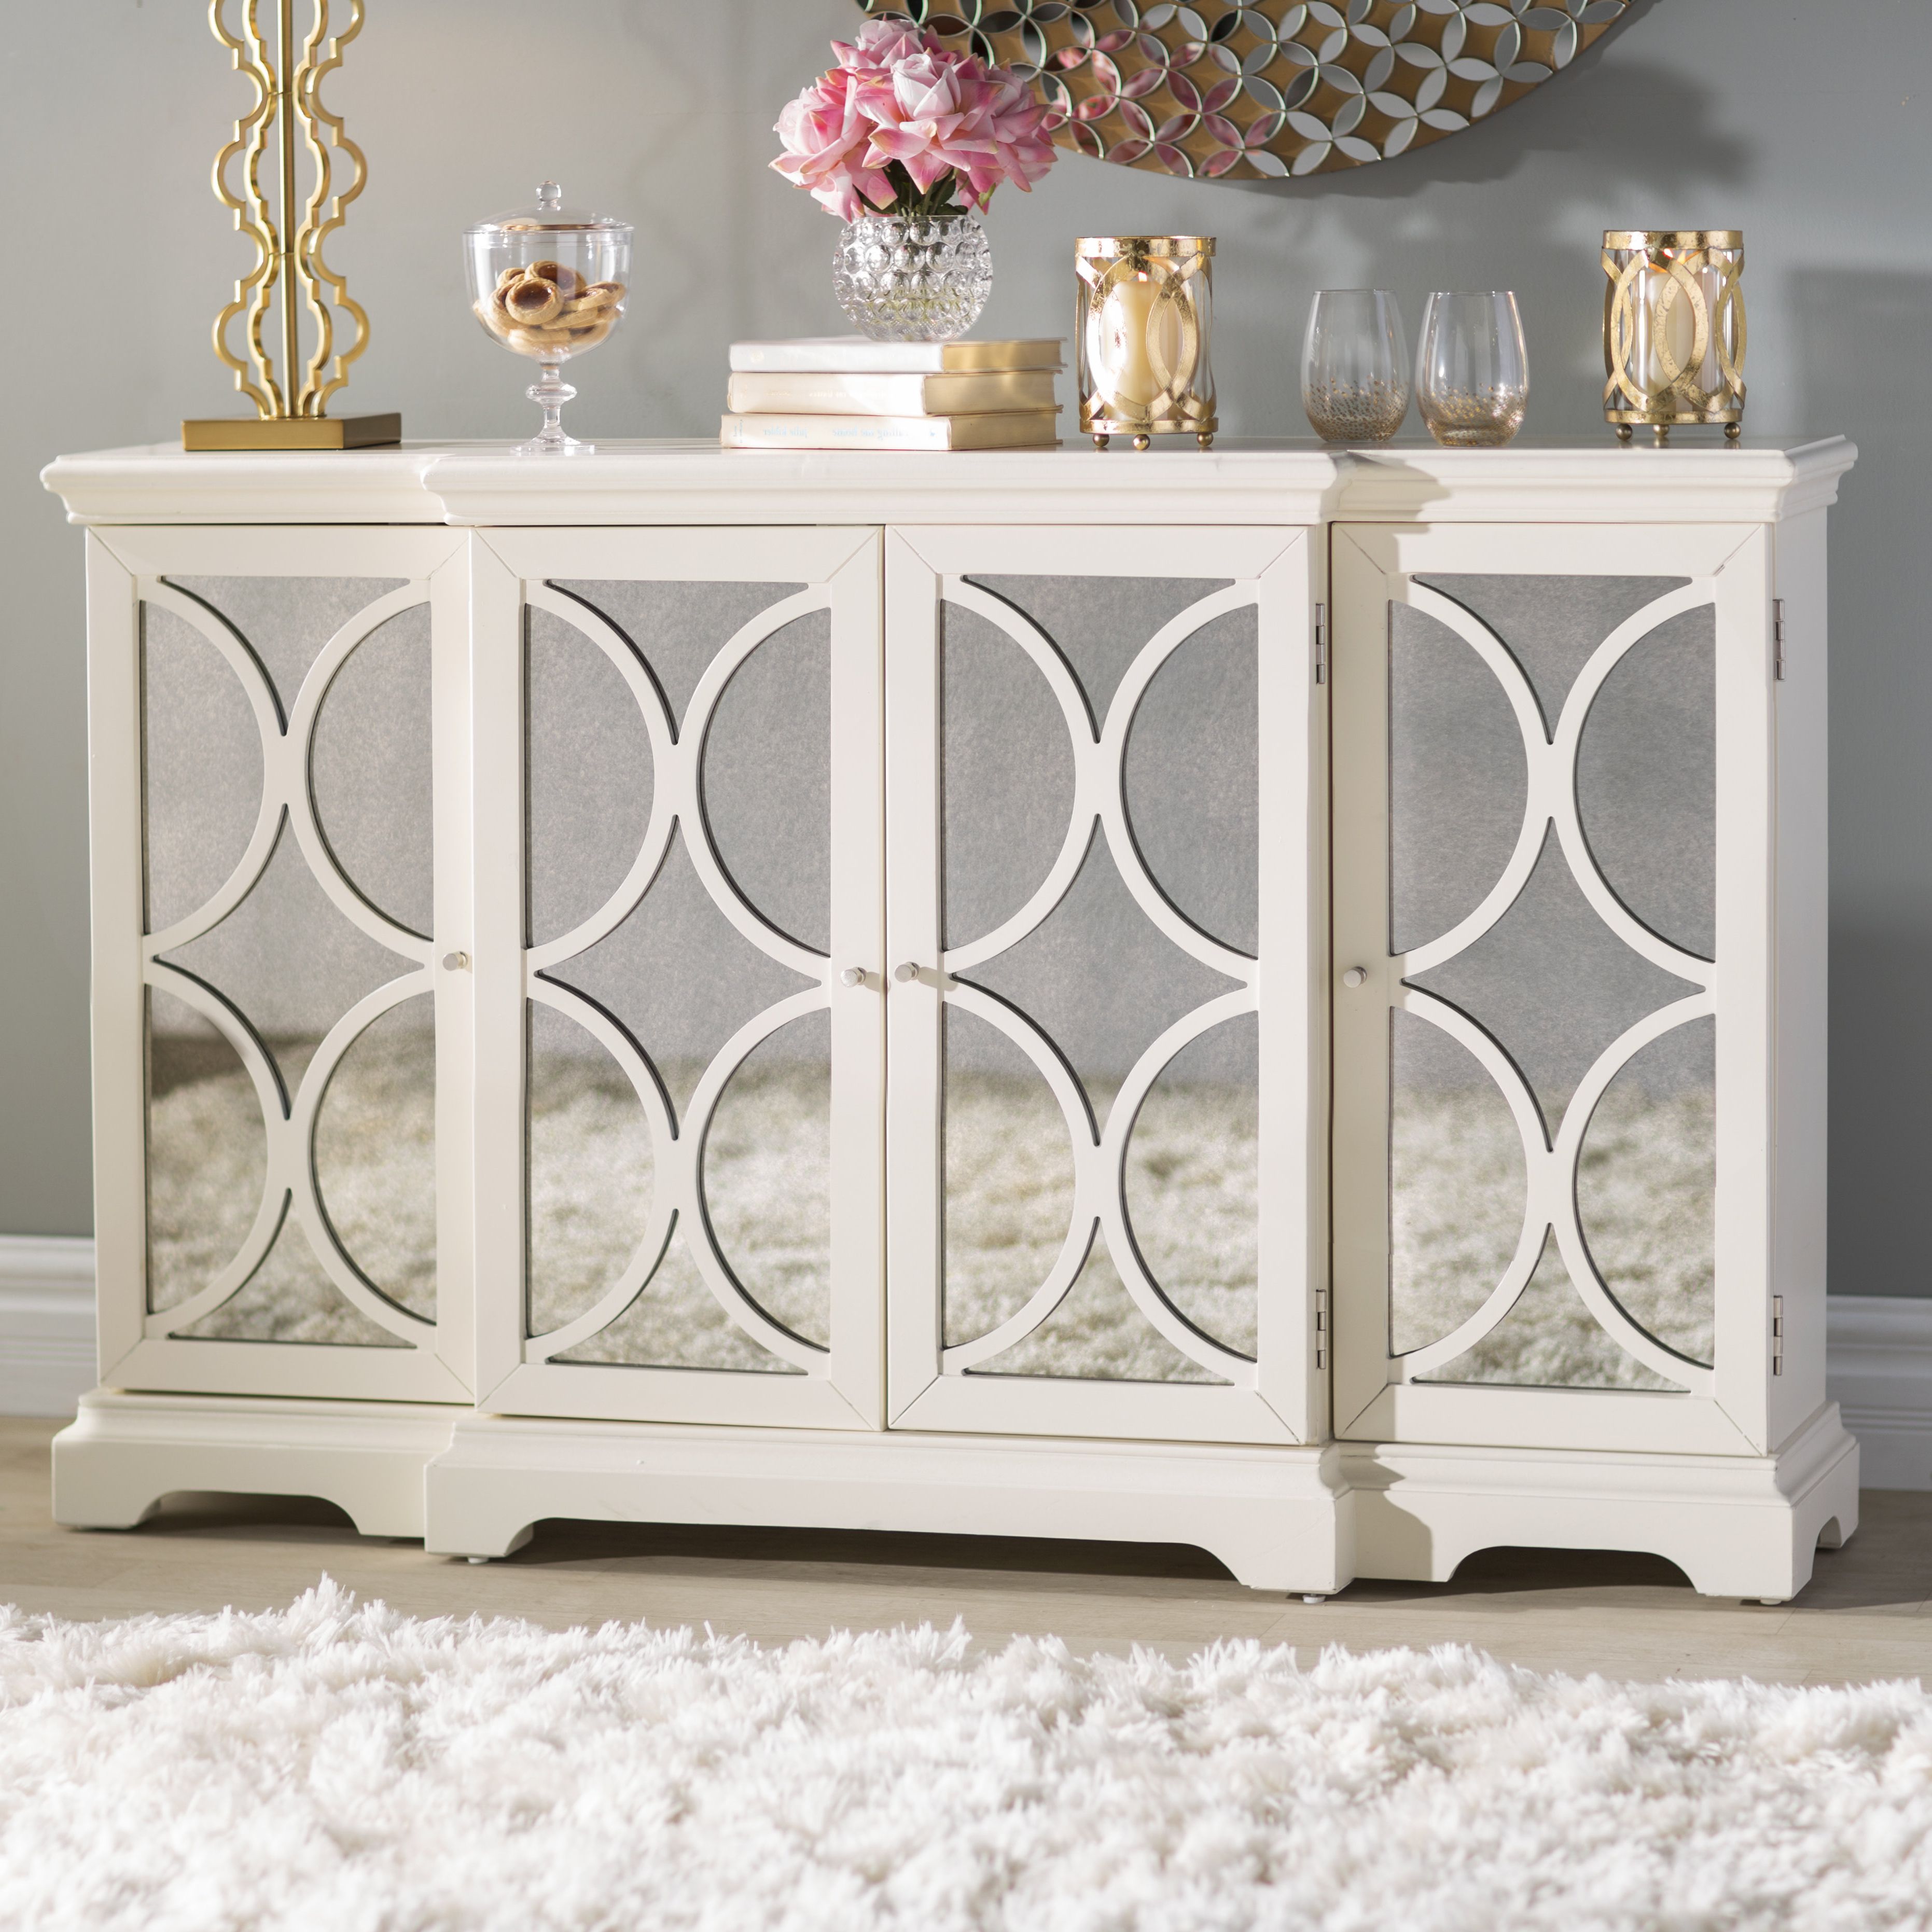 Cream Credenza | Wayfair In Pale Pink Agate Wood Credenzas (View 12 of 20)